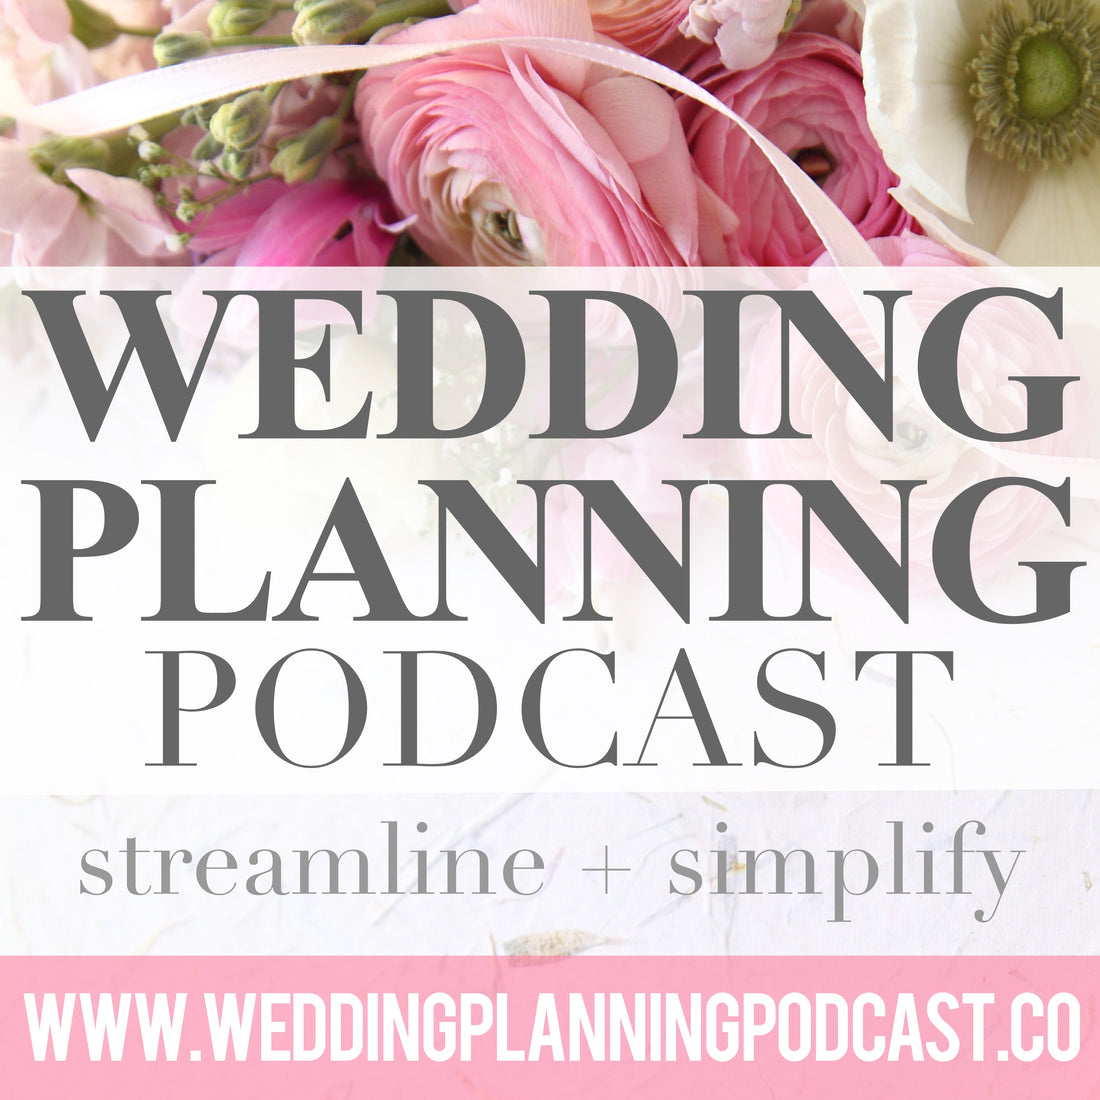 What is the WEDDING PLANNING PODCAST?